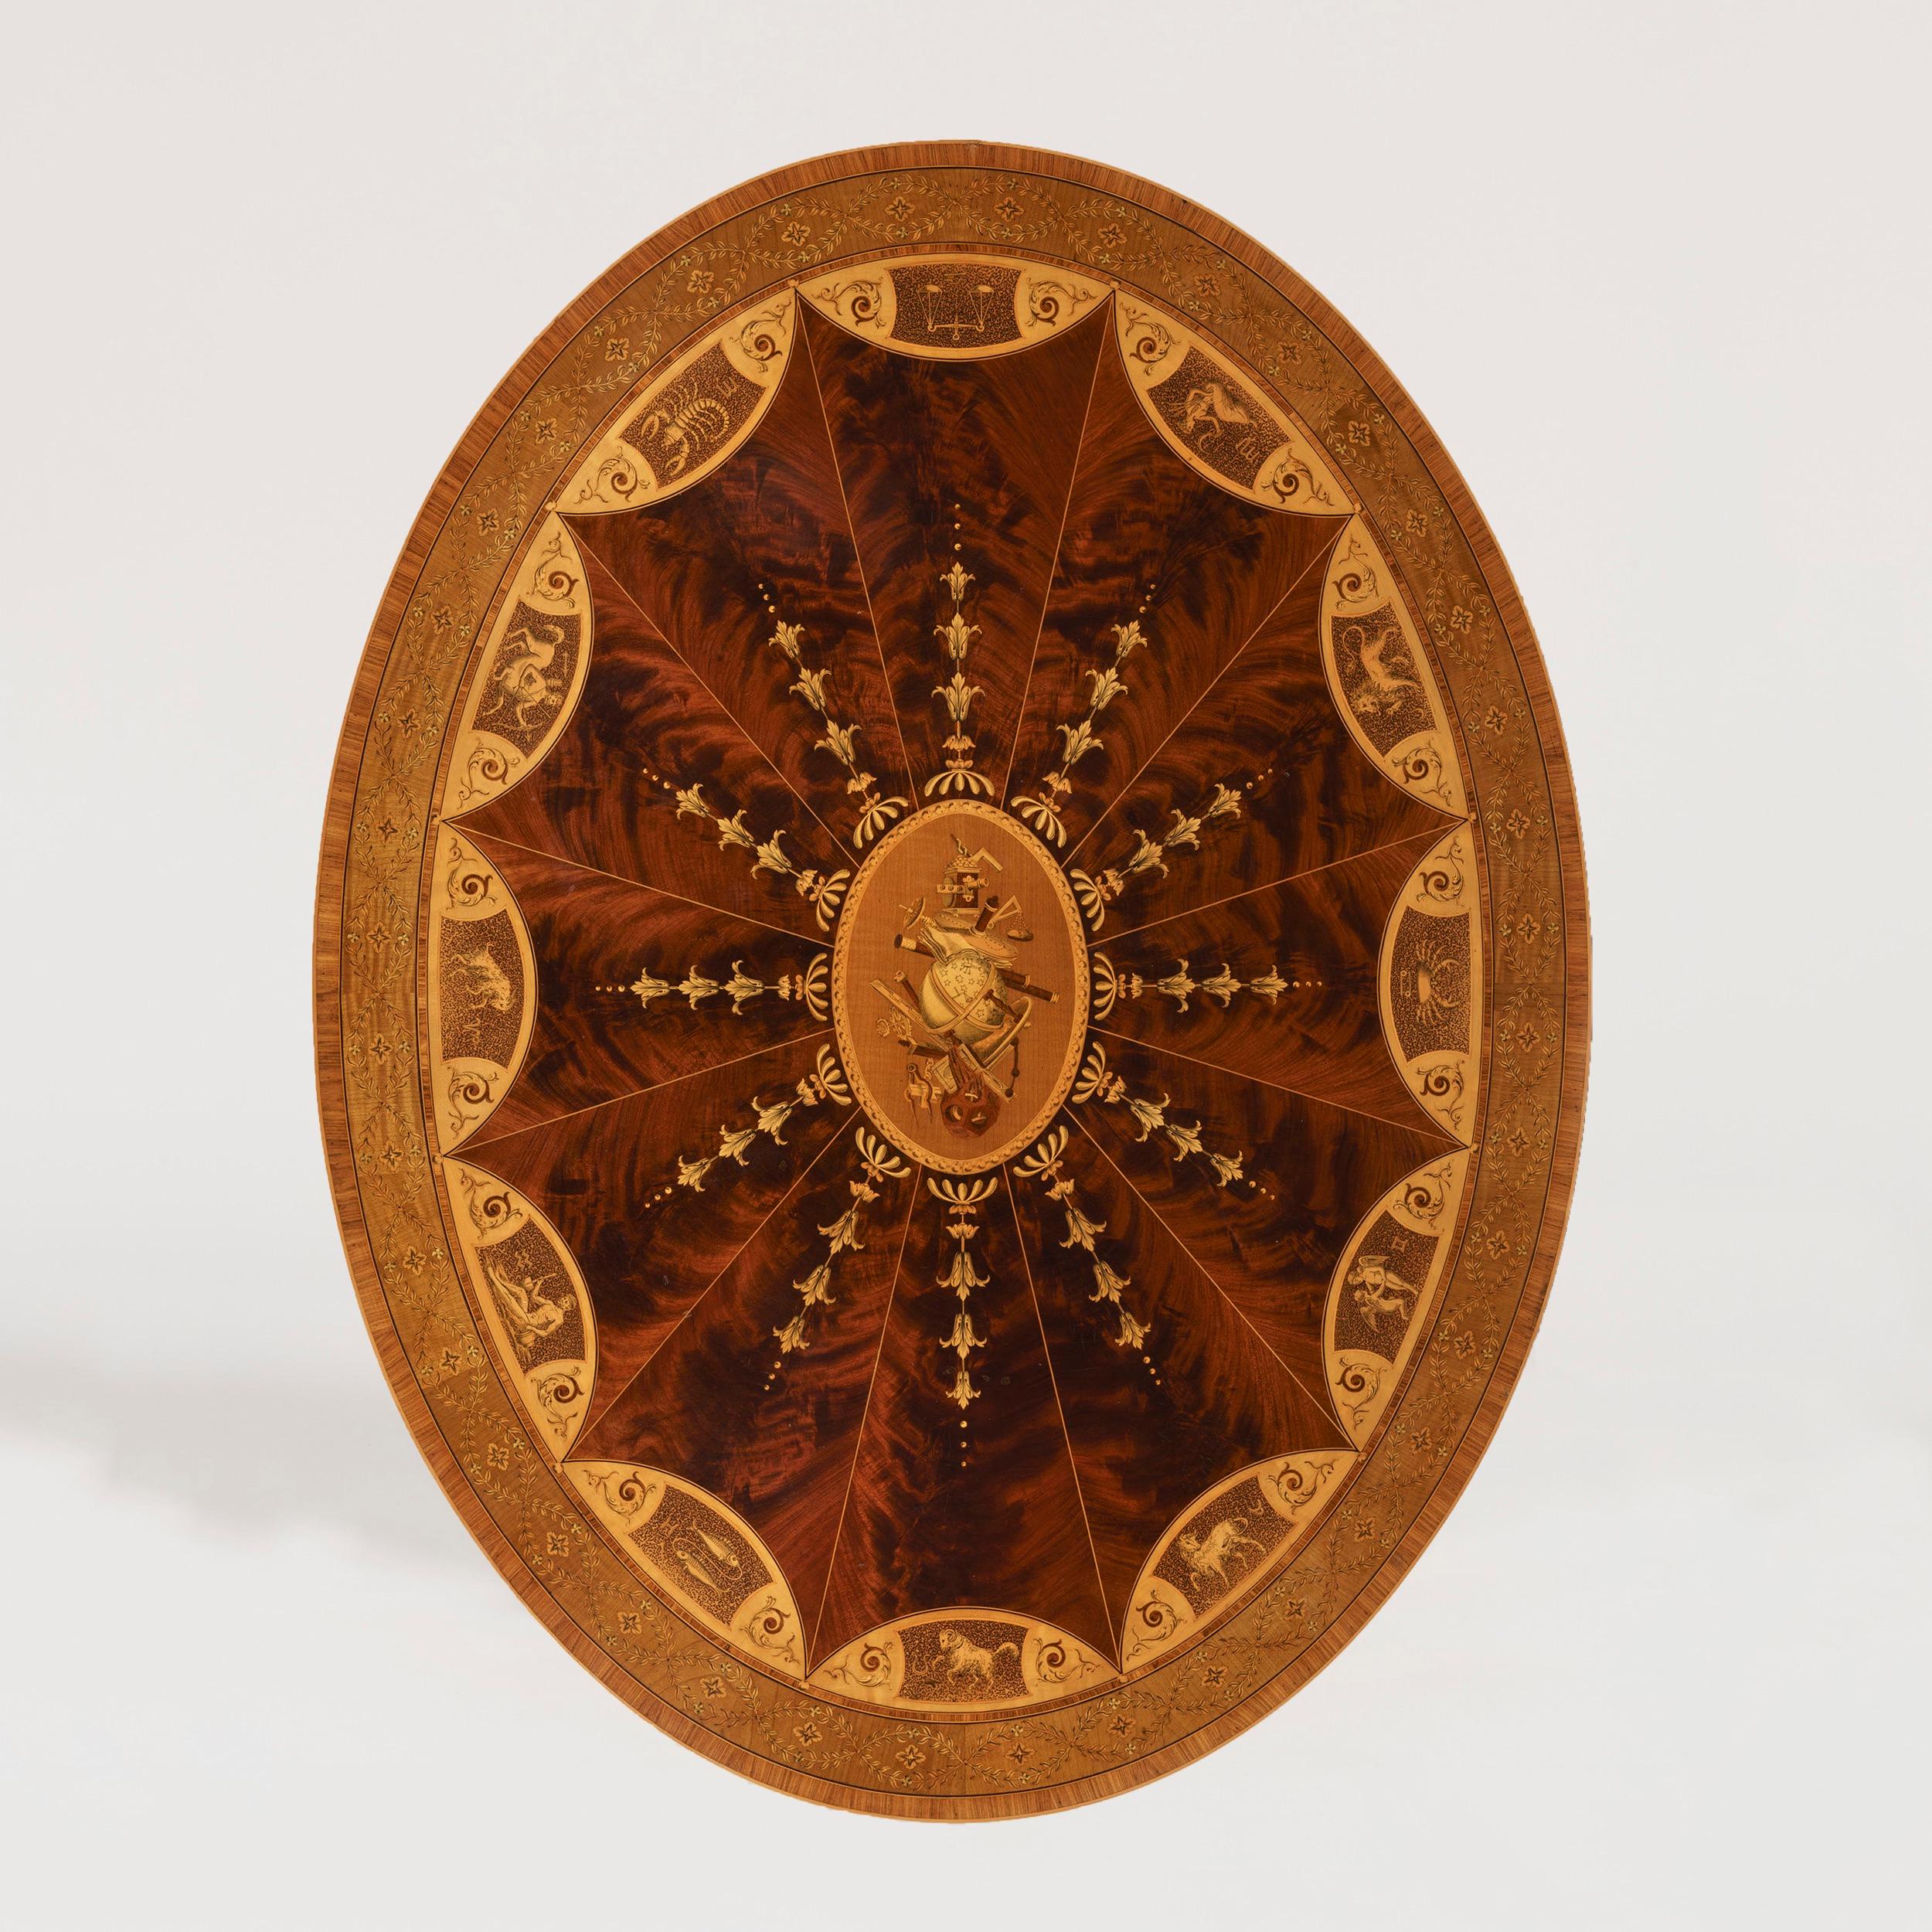 A fine quality astrological centre table
firmly attributed to Maple & Co

Constructed in very finely figured mahogany and satinwood, and having marquetry inlay of superior quality, rising from square-taper legs and spade feet on castors